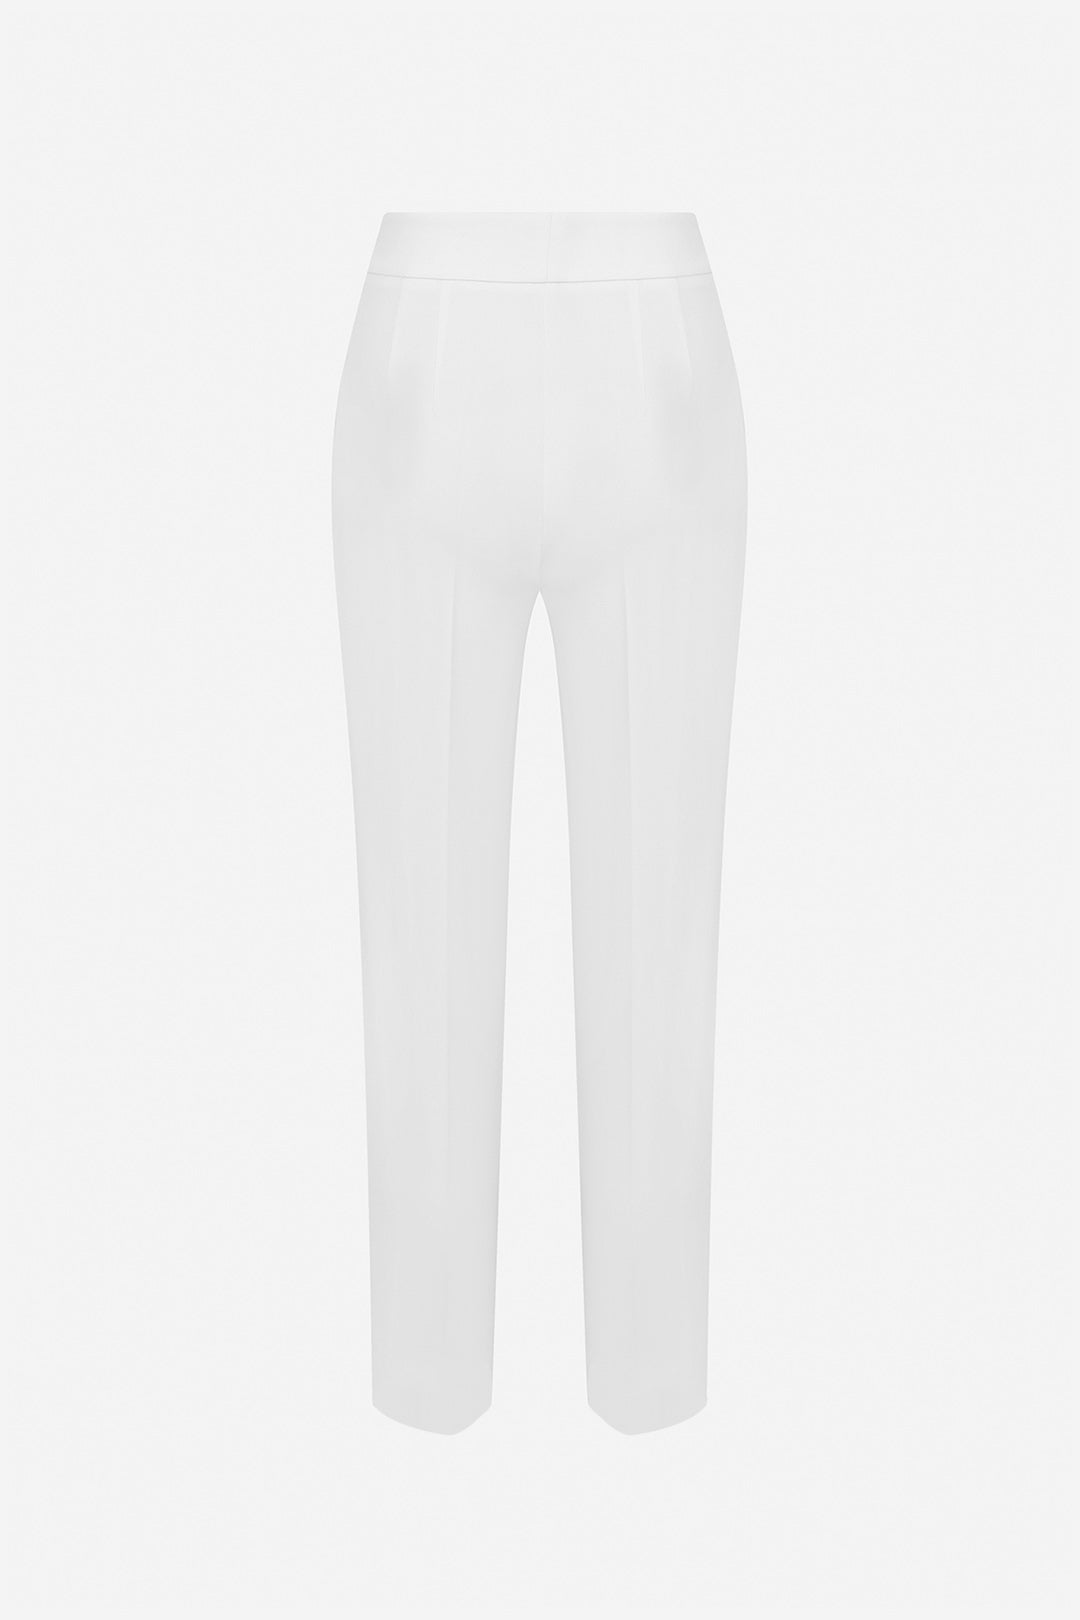 Laia - Pleated trousers in white